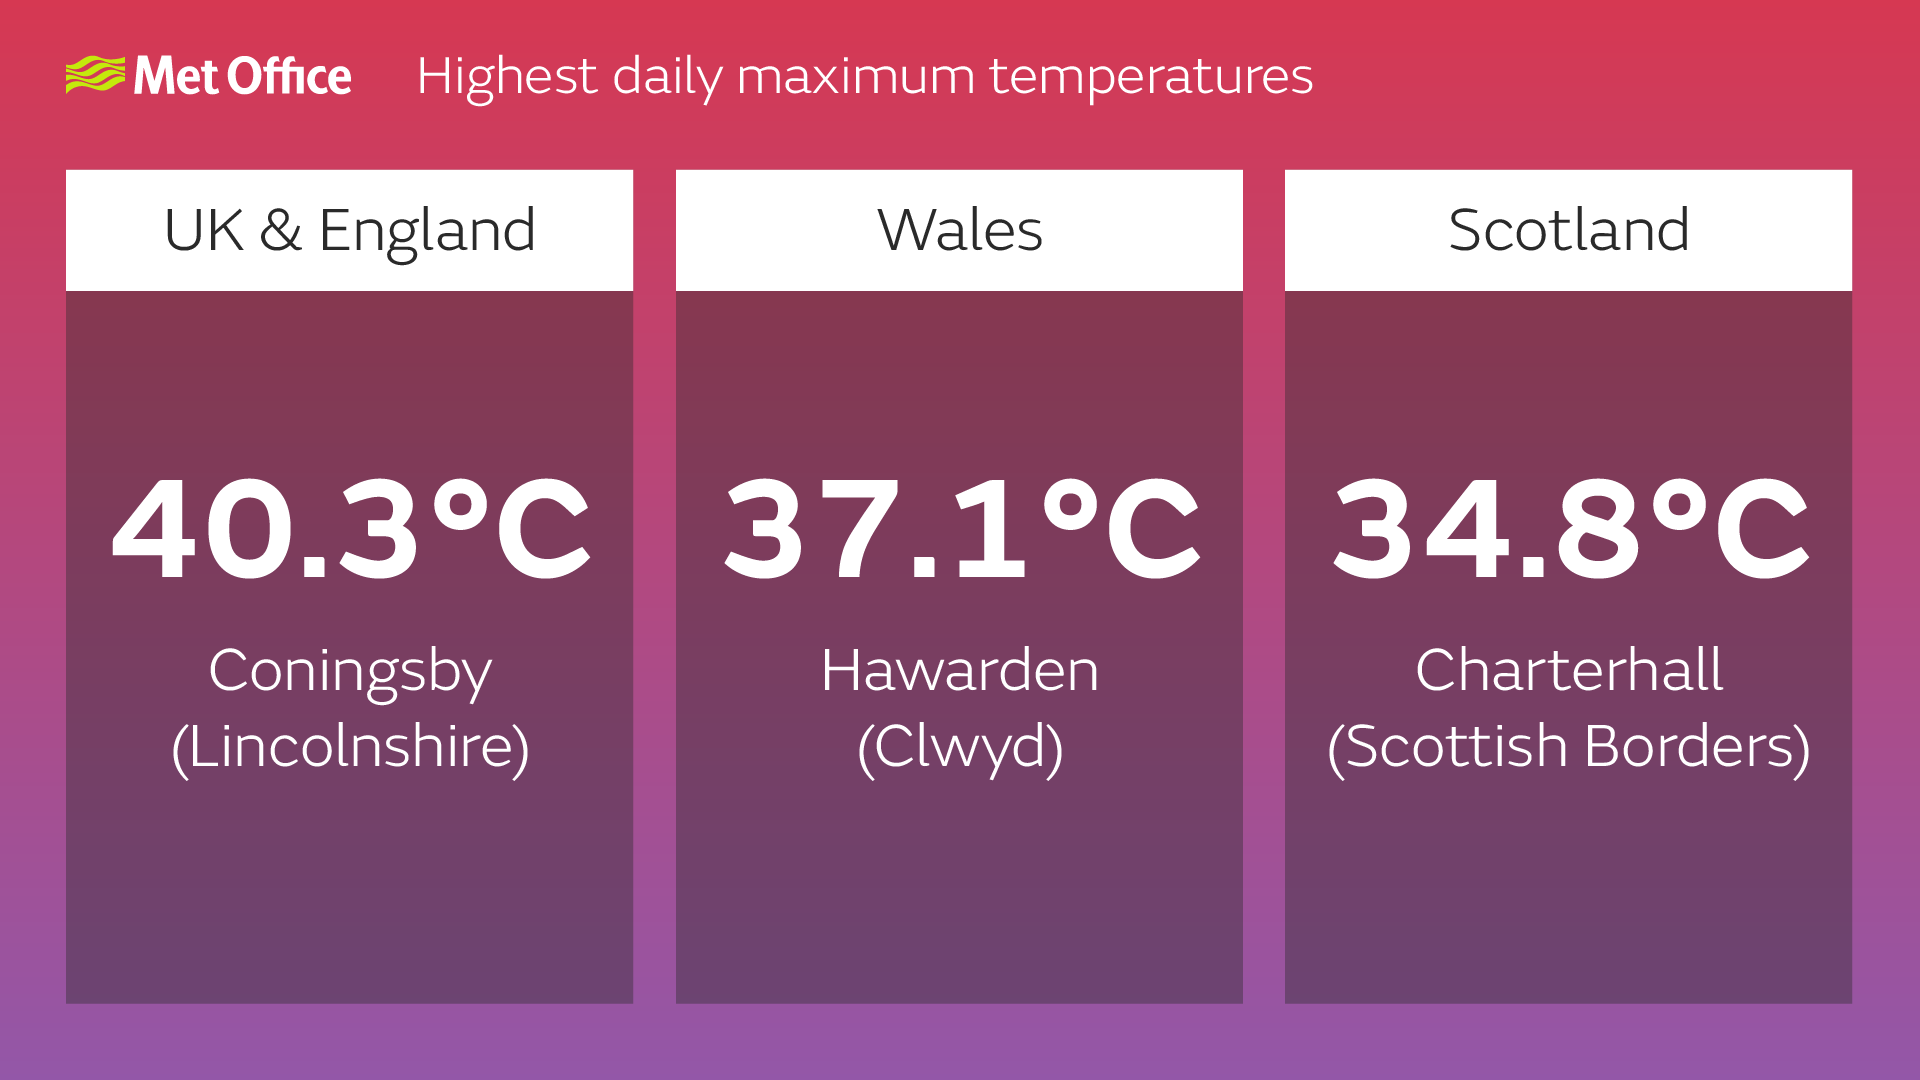 The graphic shows new highest daily maximum temperatures. UK and England: 40.3C, Coningsby. Wales: 37.1C, Hawarden. Scotland: 34.8C, Charterhall.